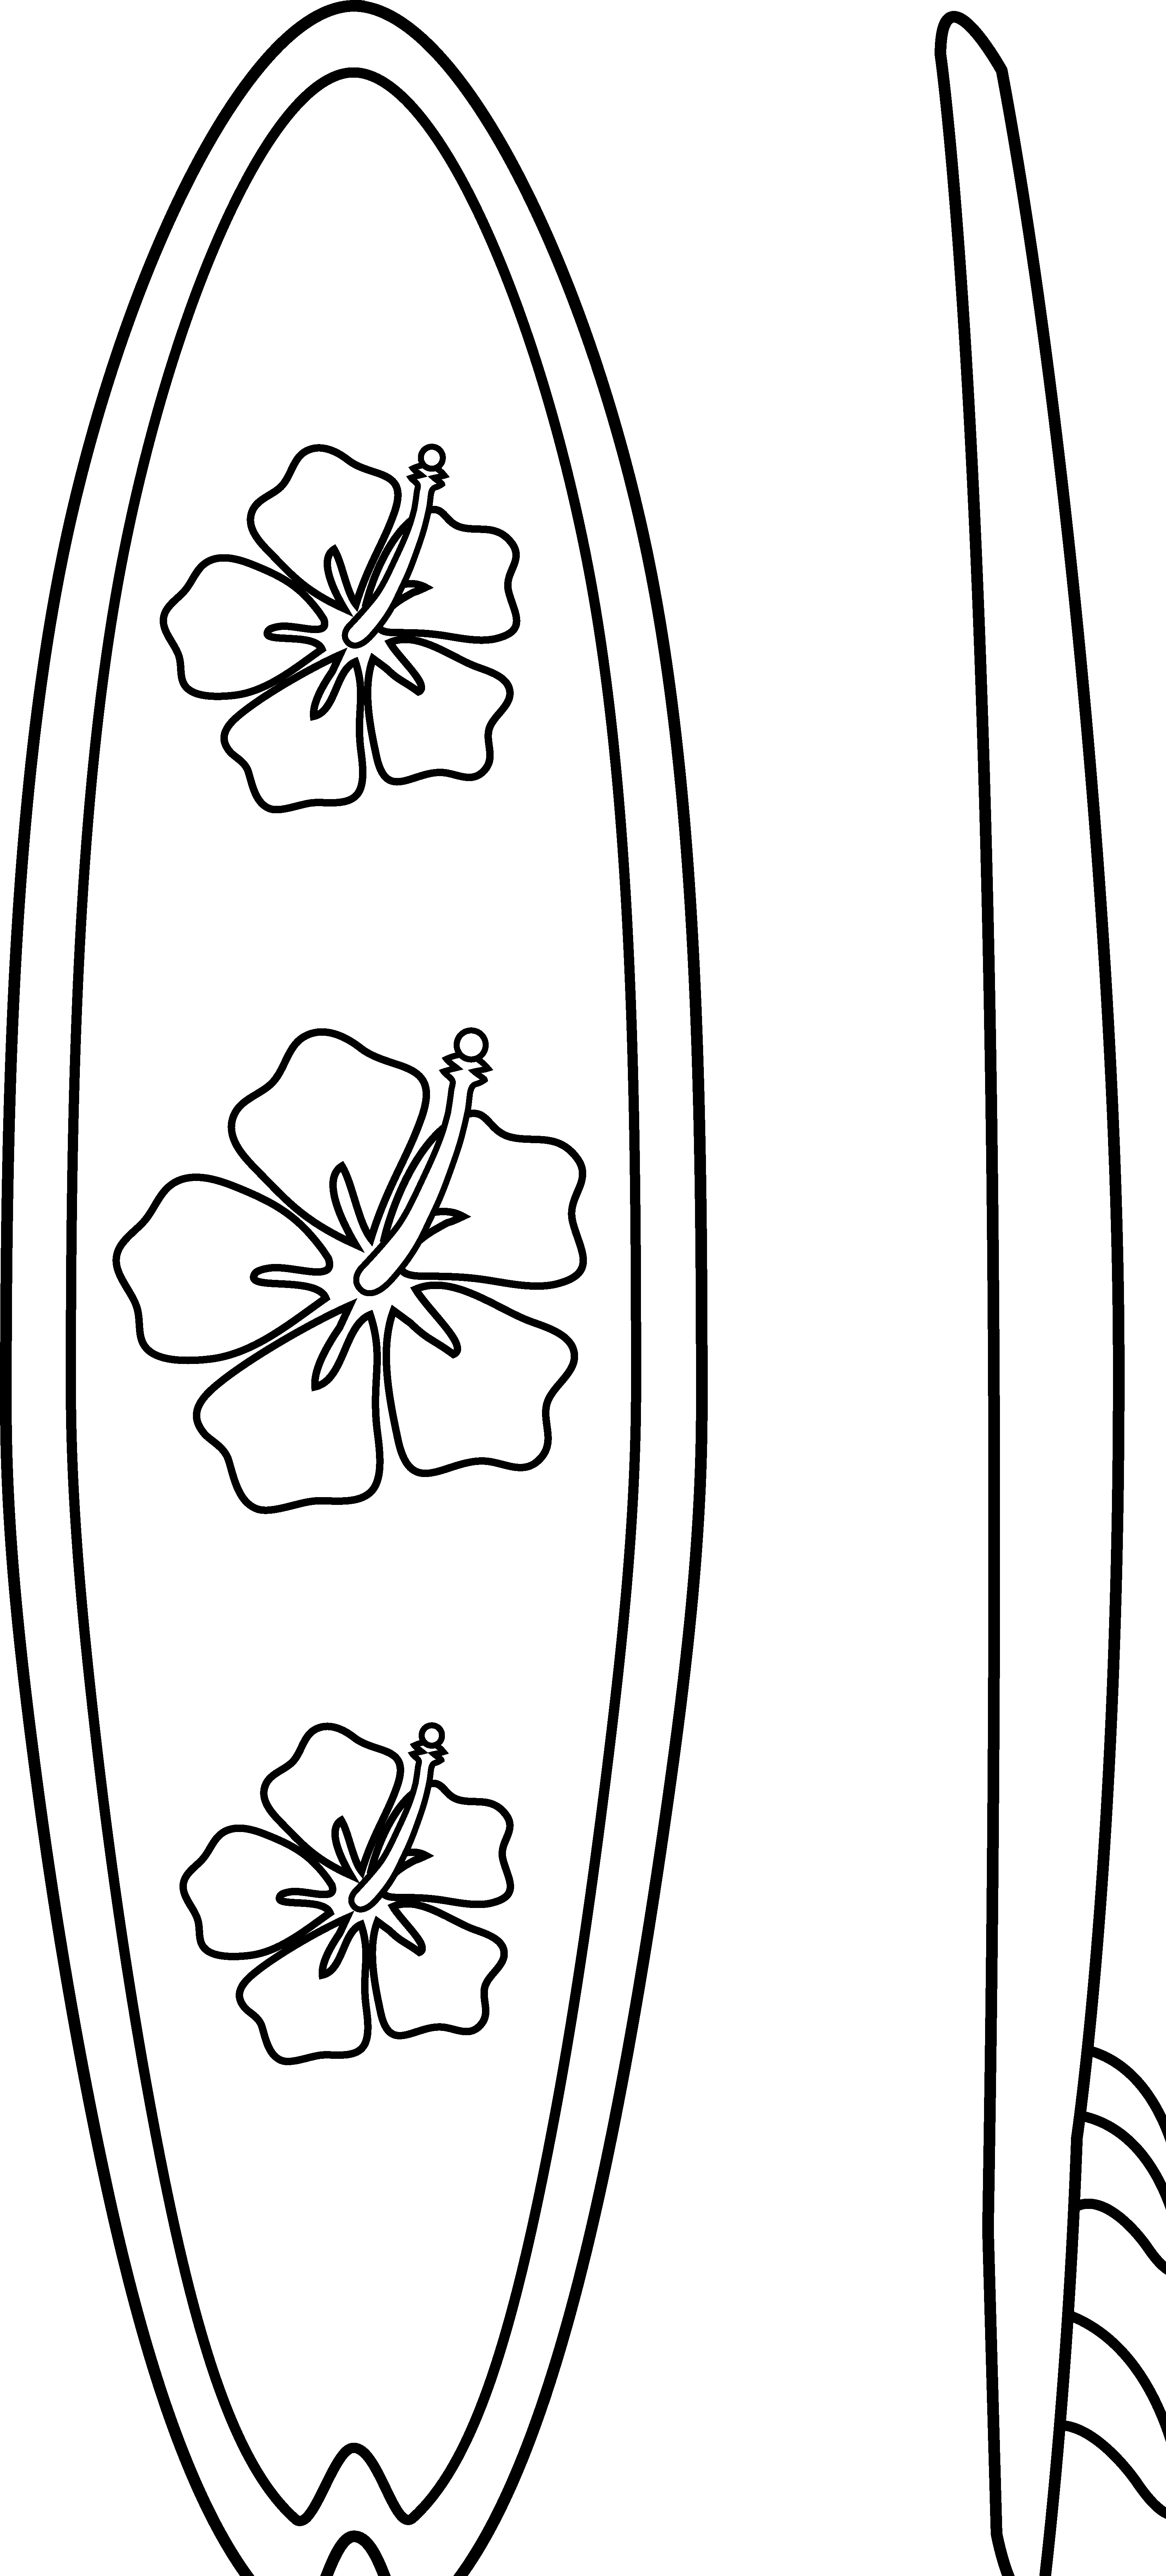 Surfboard Coloring Page Printable